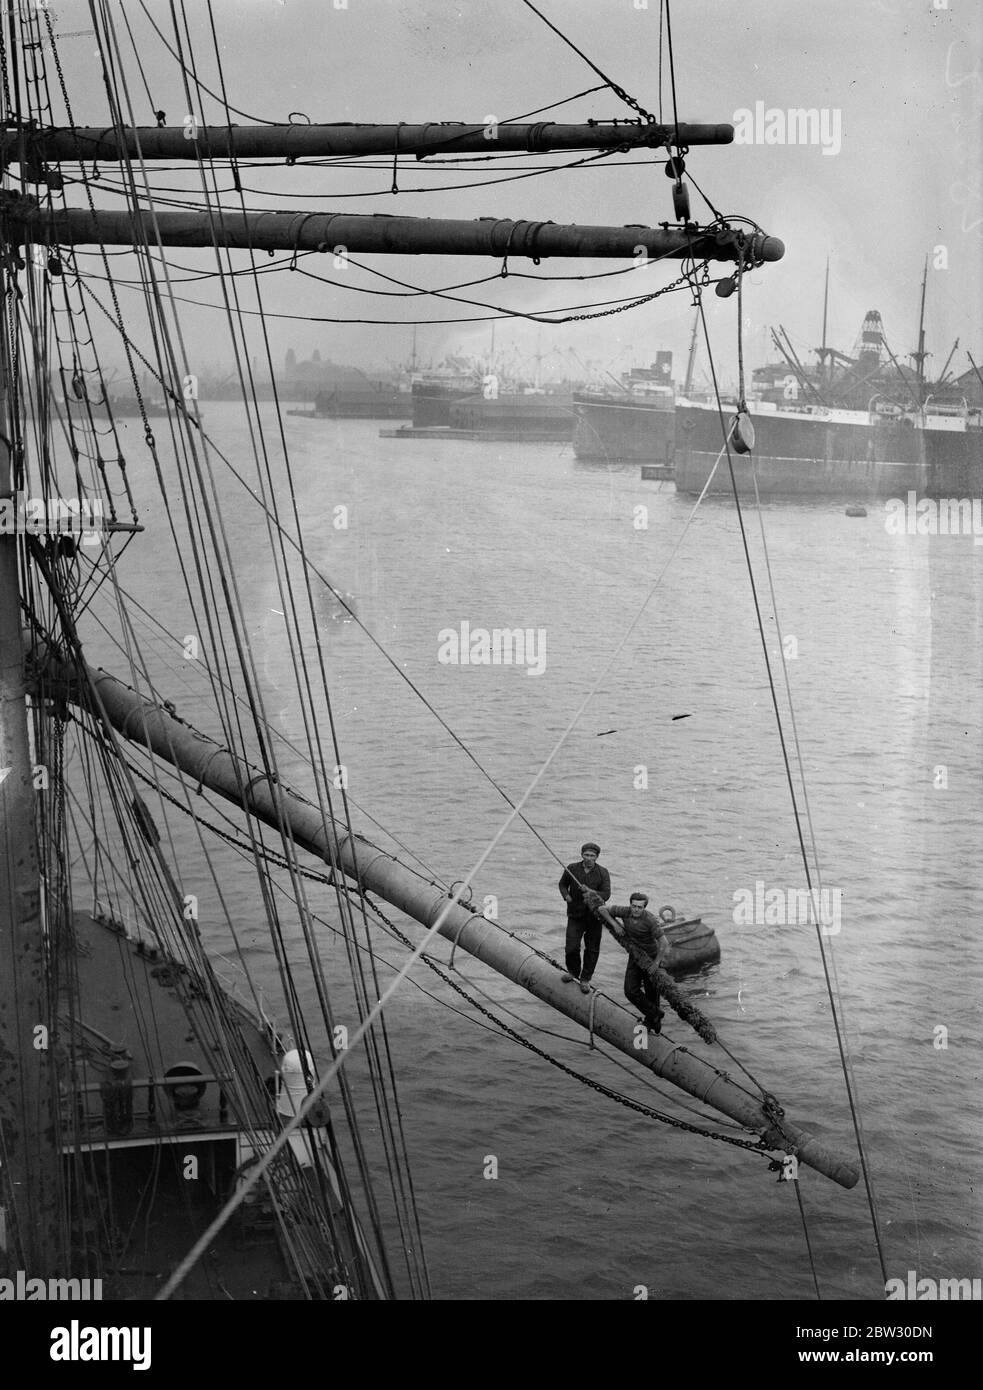 Last grain windjammer arrives in London . The last arrival of the windjammer grain fleet from Australia , the full rigged Finnish ship Grace Harwar , arrived at Victoria Docks , London , after a voyage of 143 days . Members of the crew in the yard arms of the rigging at Victoria Docks on arrival . 22 September 1932 Stock Photo